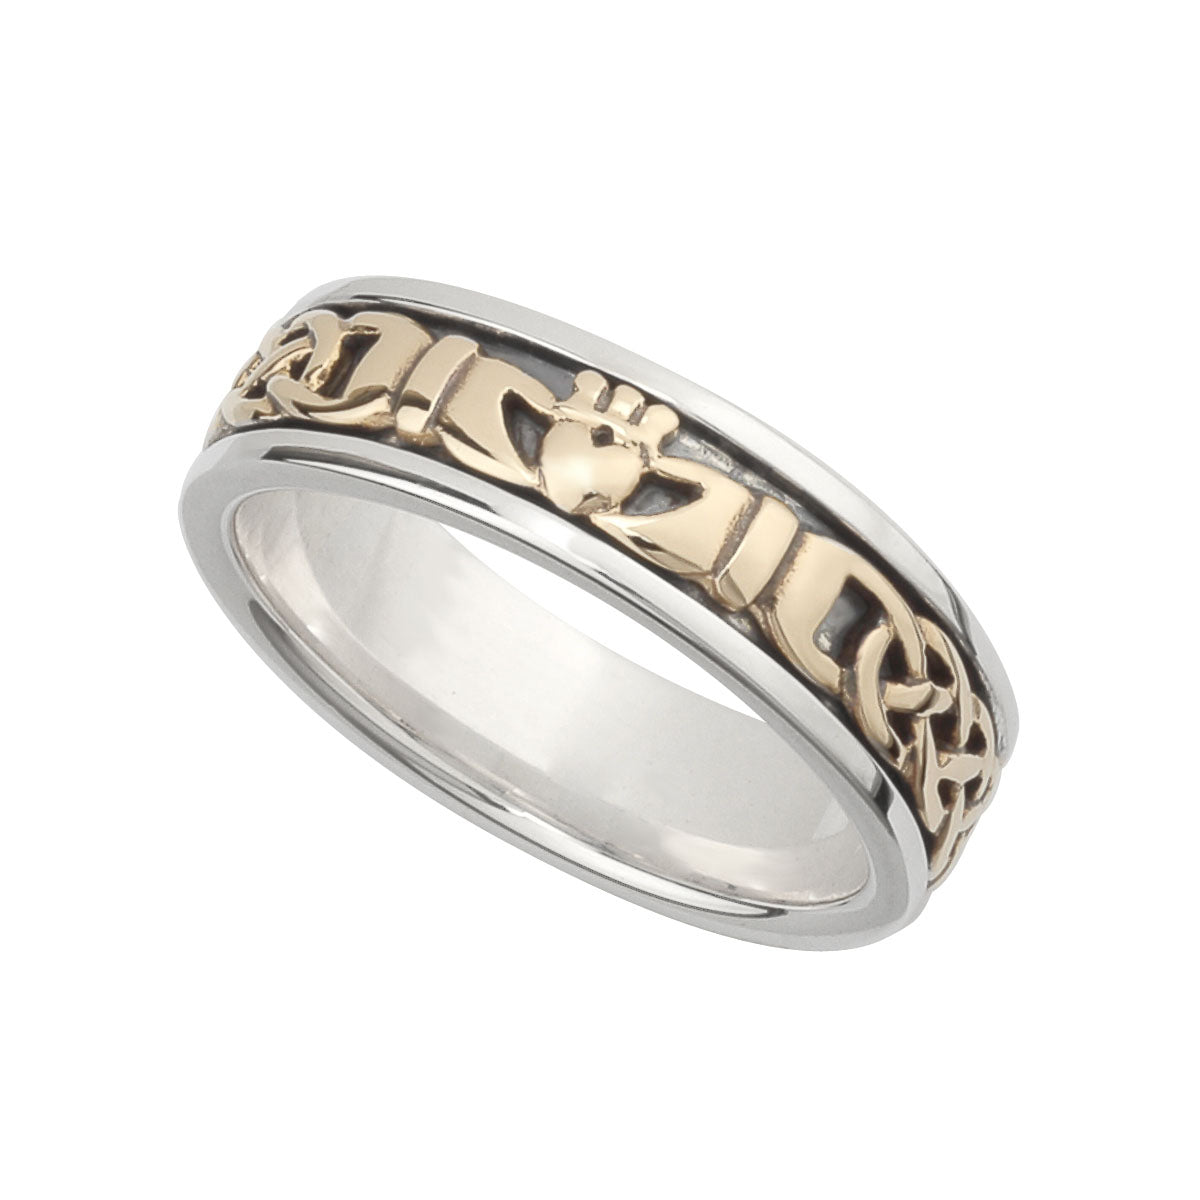 Ladies gold and silver claddagh band ring s21007 from Solvar